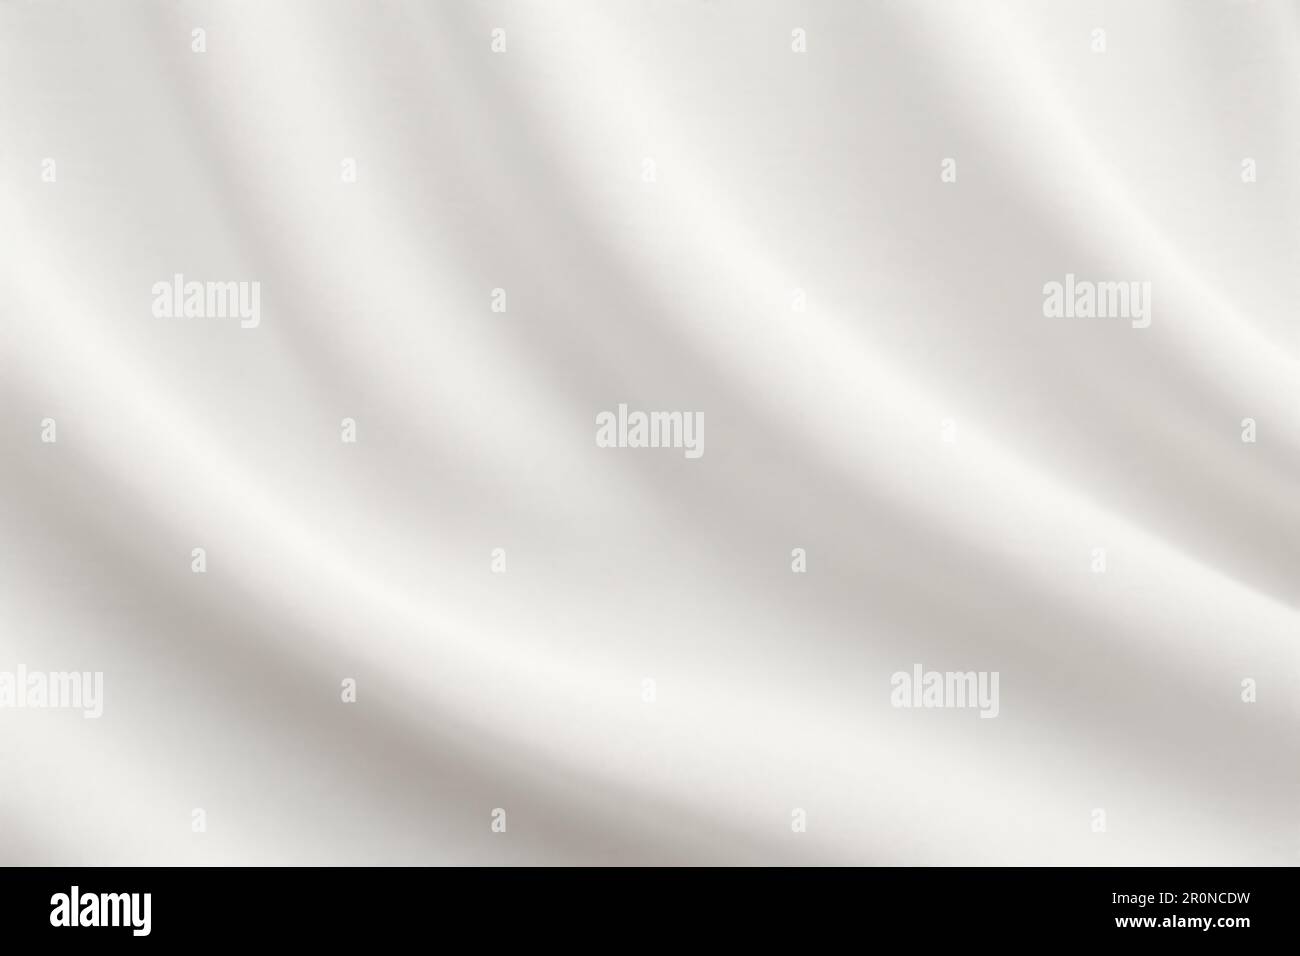 White silk fabric texture and background seamless Stock Photo